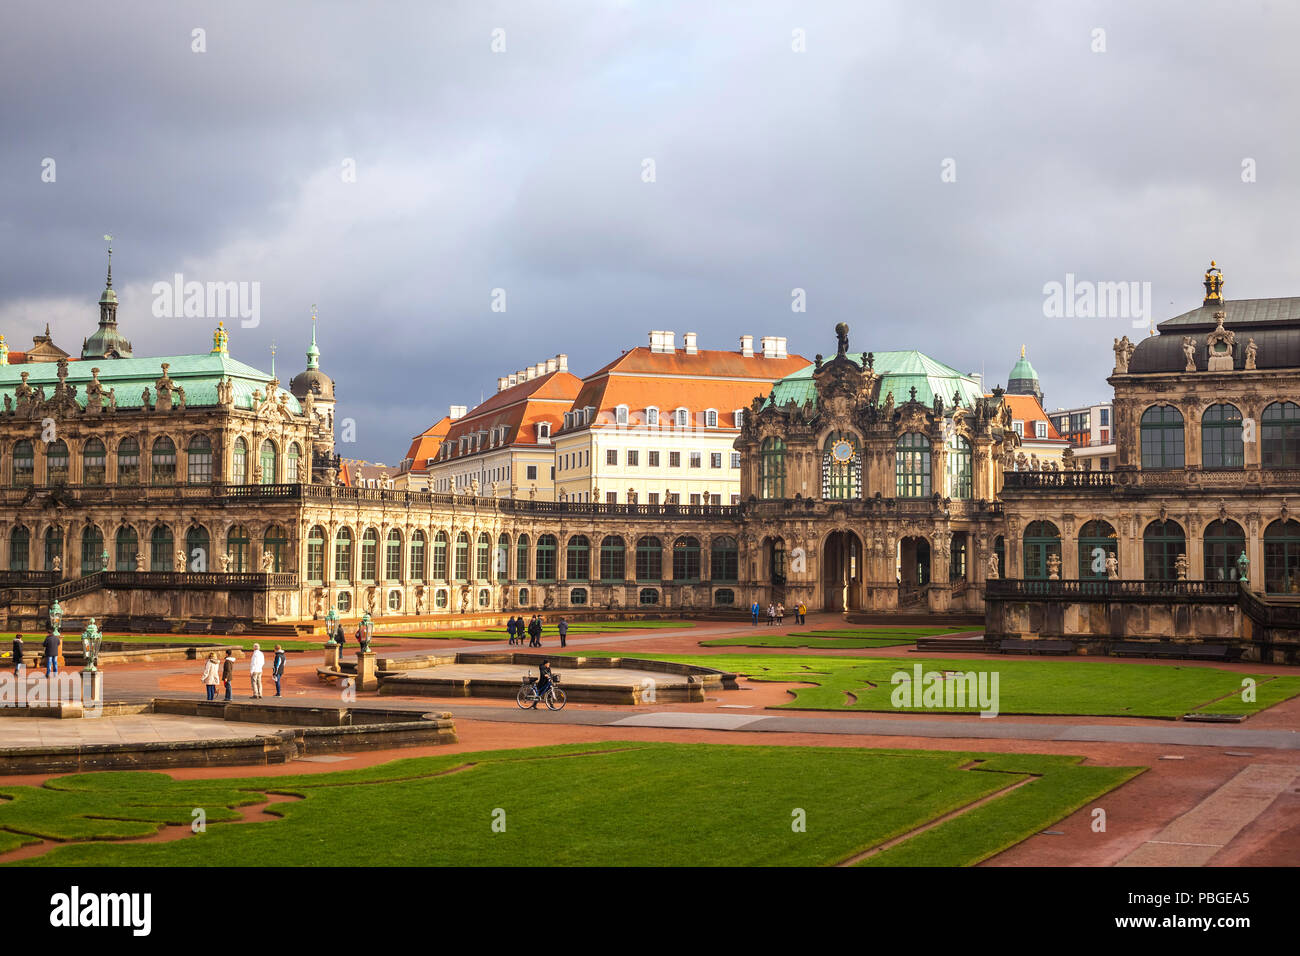 22.01.2018 Dresden, Germany - Zwinger Palace (architect Matthaus Poppelmann) - royal palace since 17 century in Dresden. Stock Photo